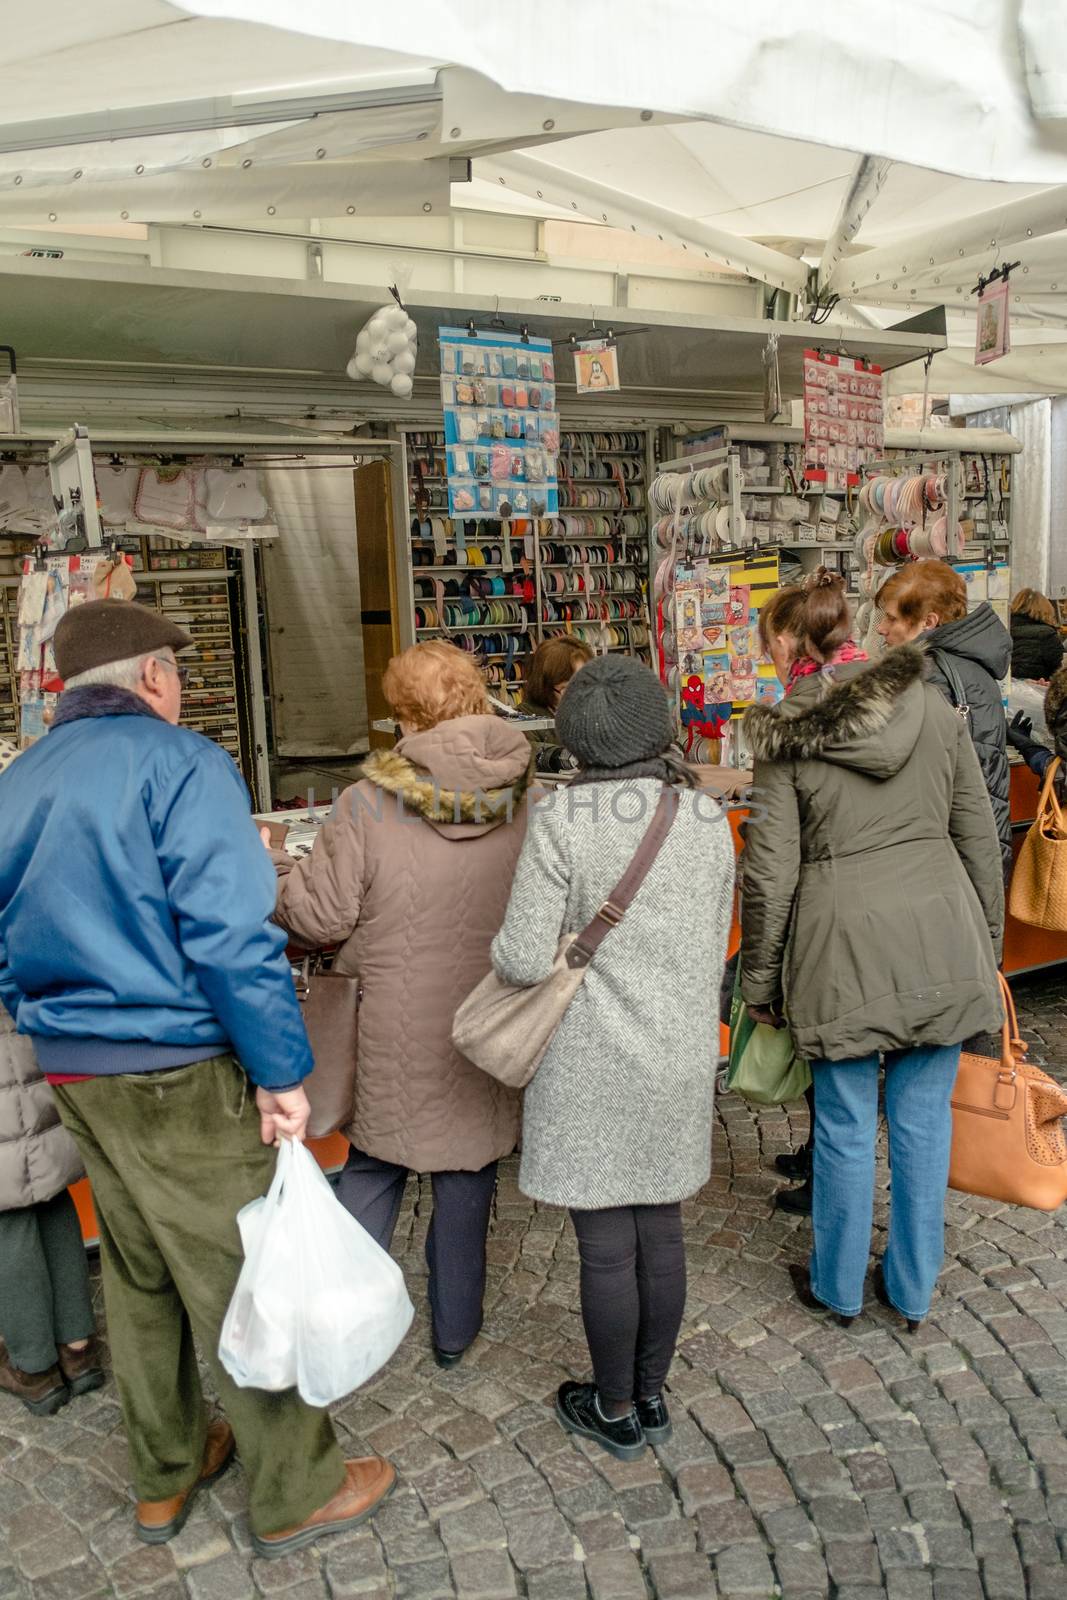 People shopping in the street market of Cremona, Italy. January 2016